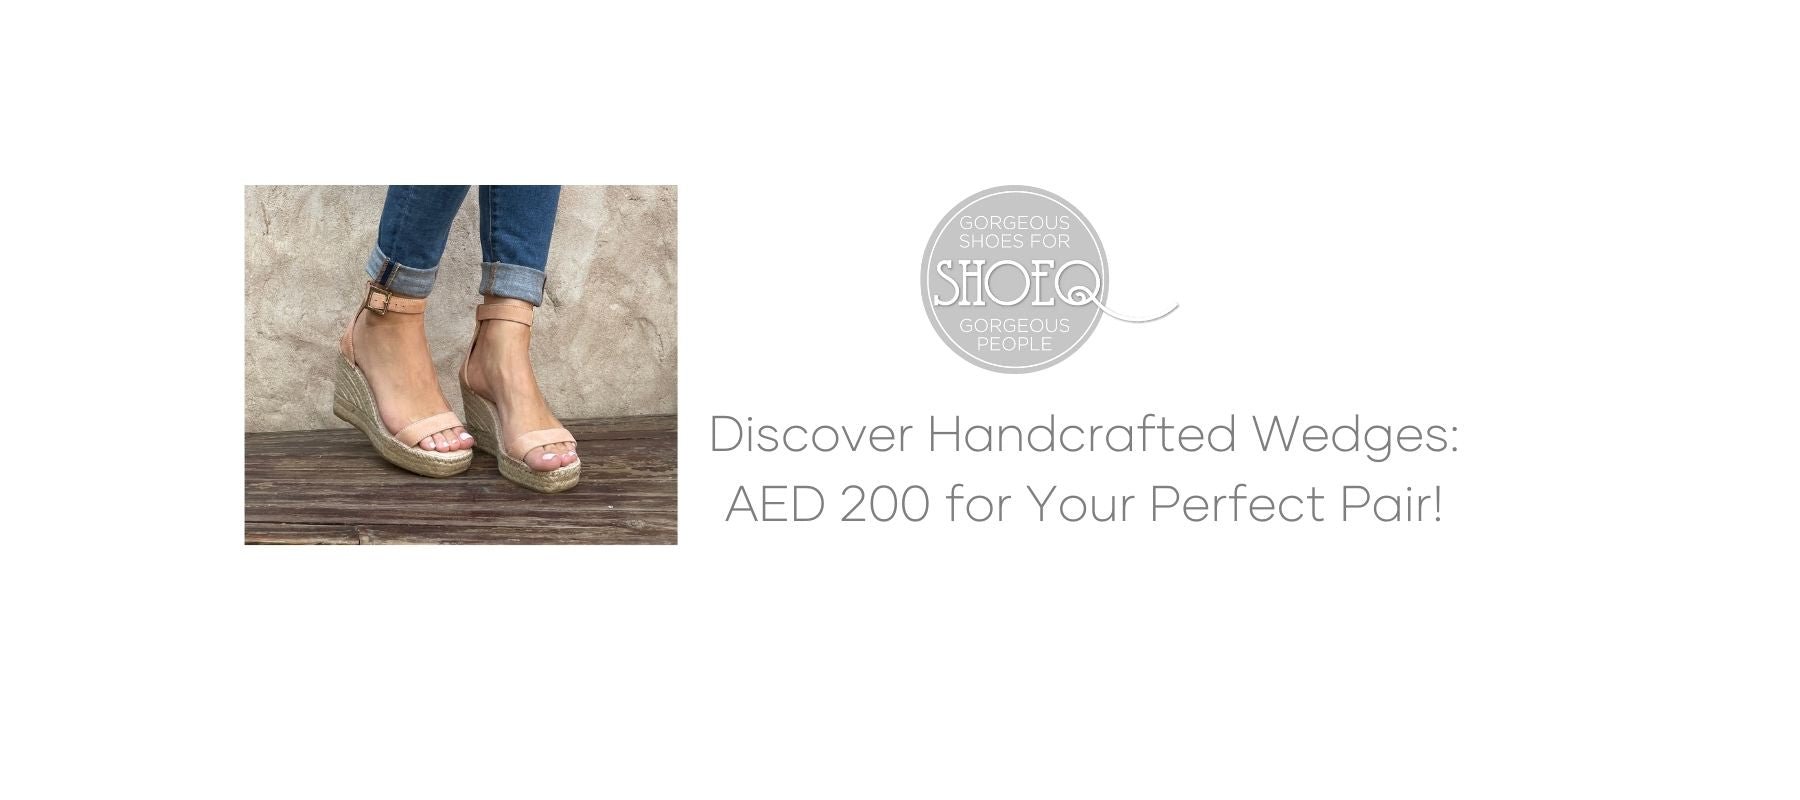 Discover Handcrafted Wedges: AED 200 for Your Perfect Pair! - Shoeq